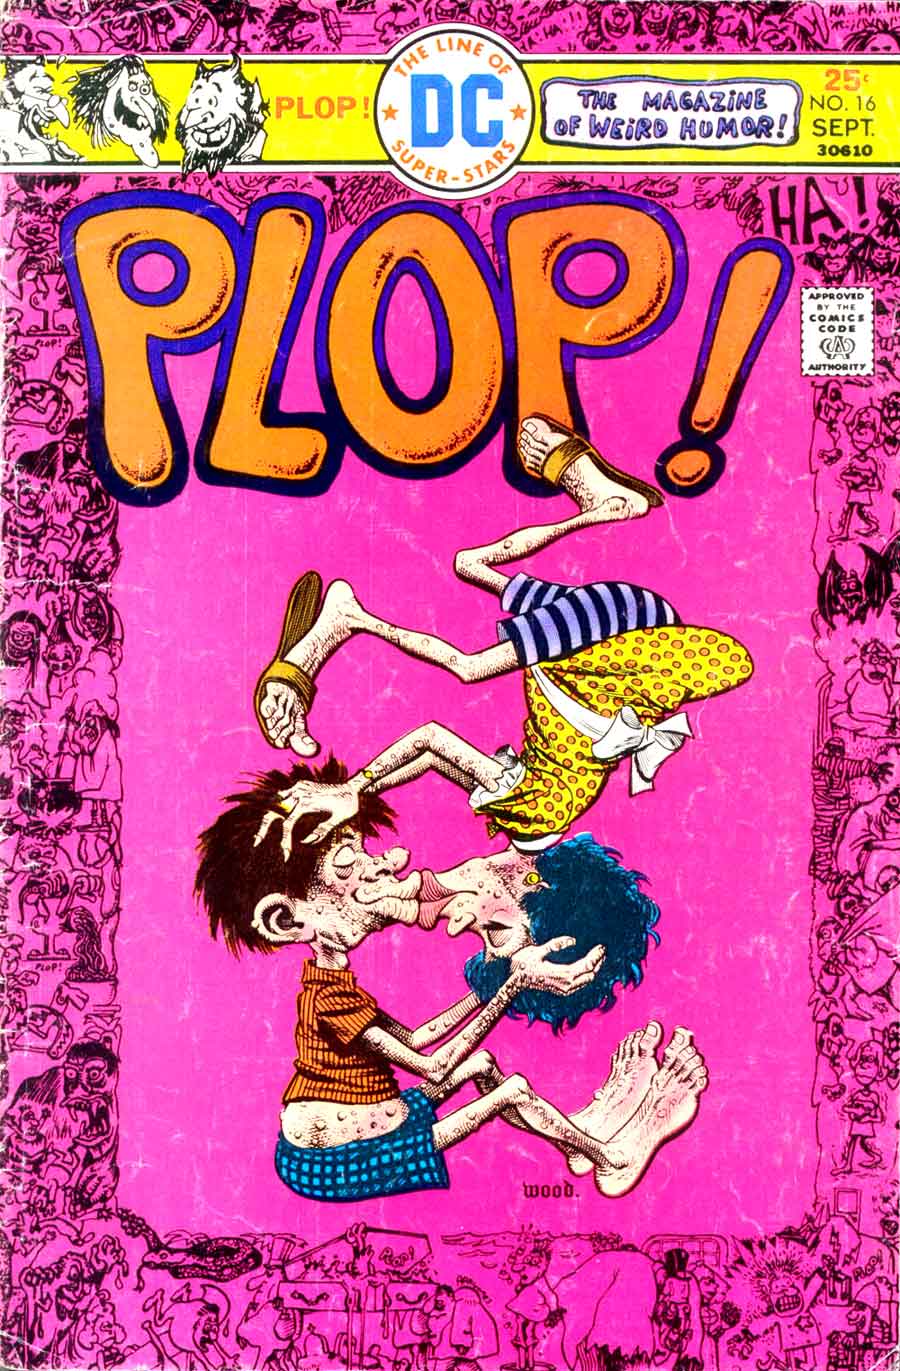 Plop v1 #18 dc 1970s bronze age comic book cover art by Wally Wood